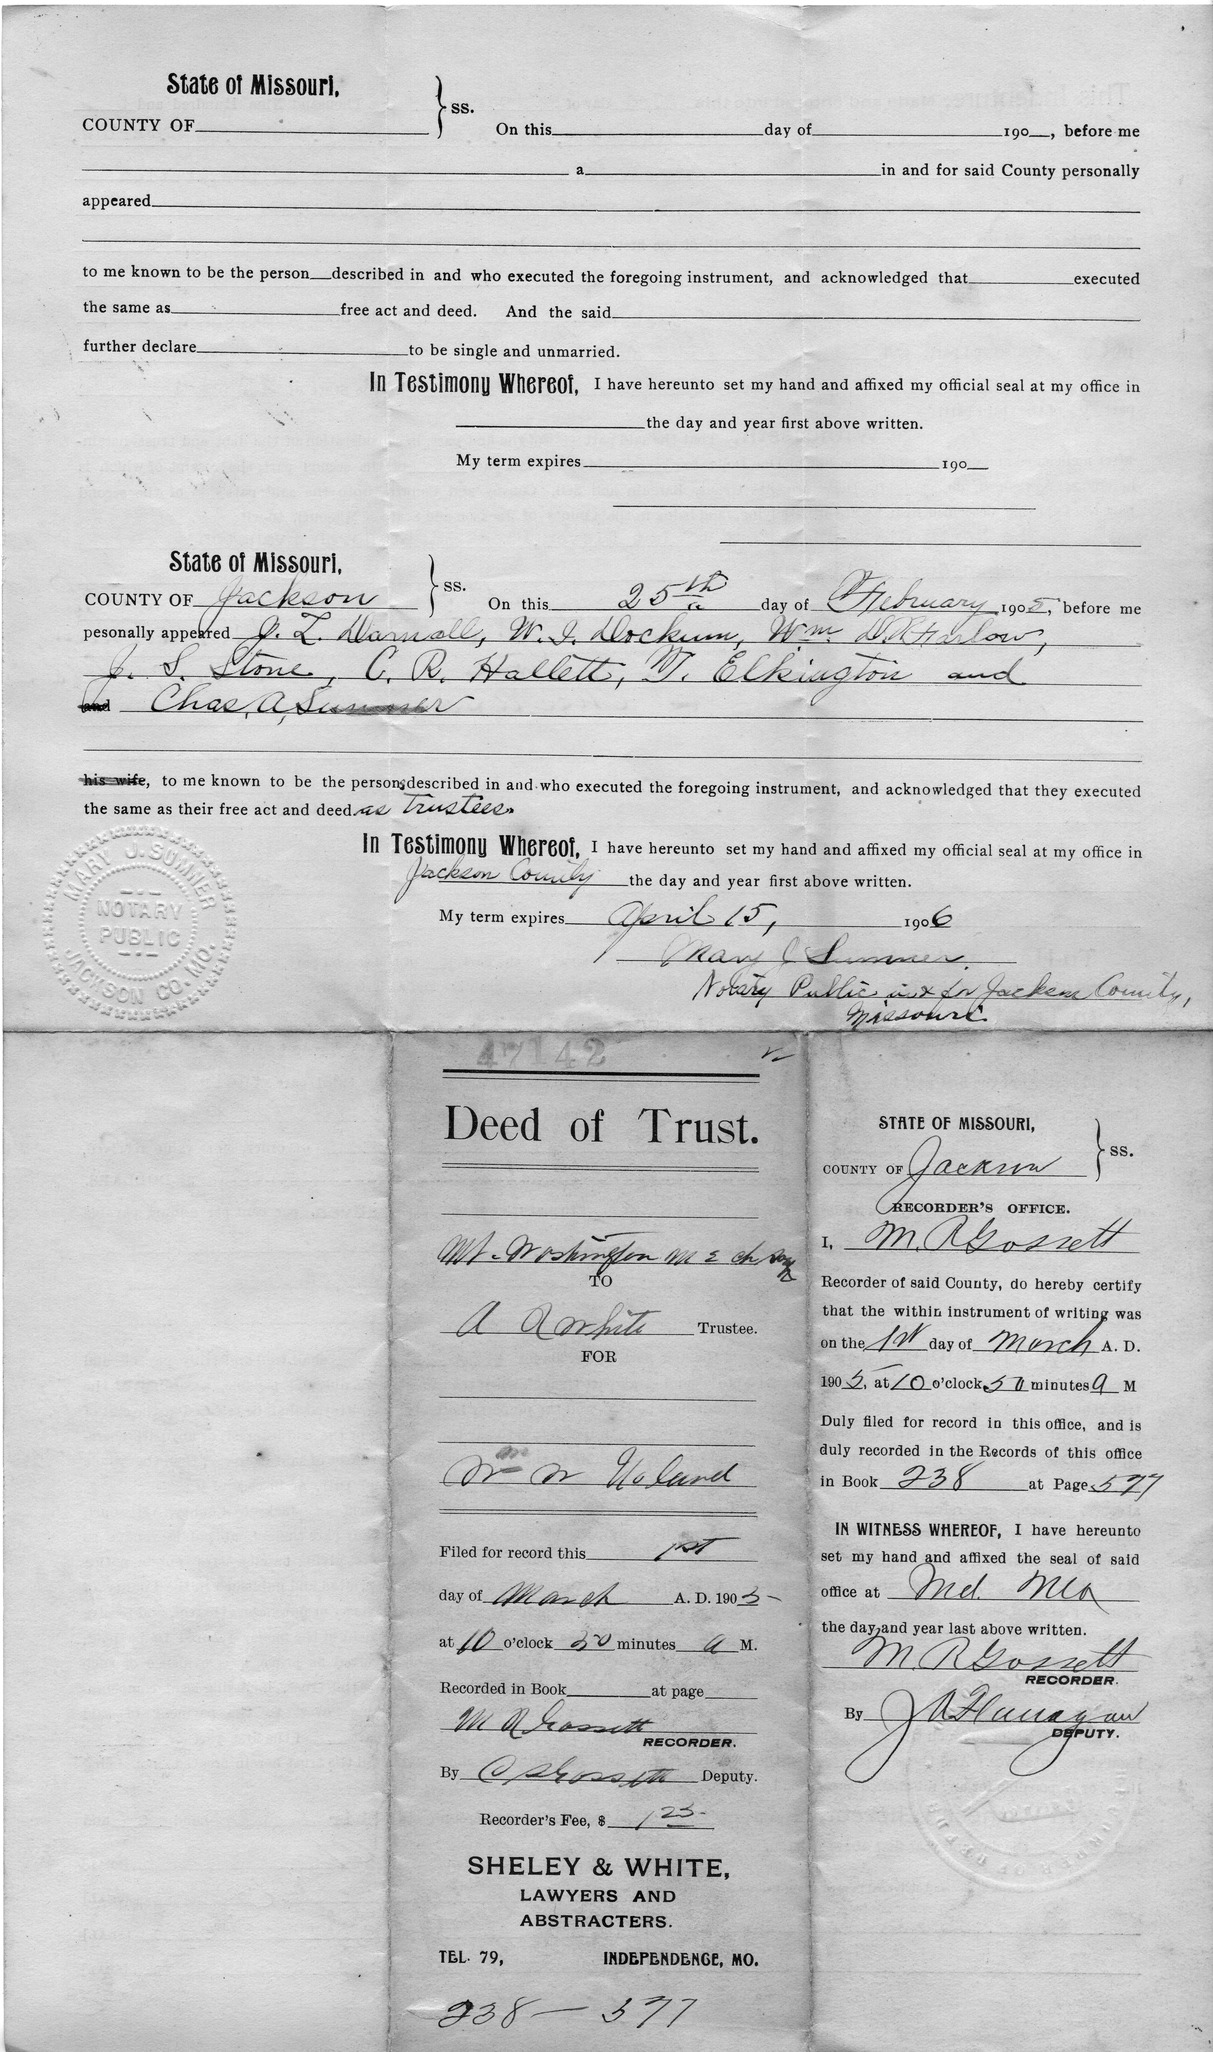 Deed of Trust from James T. Darnall et al. to Alma R. White for W. W. Noland